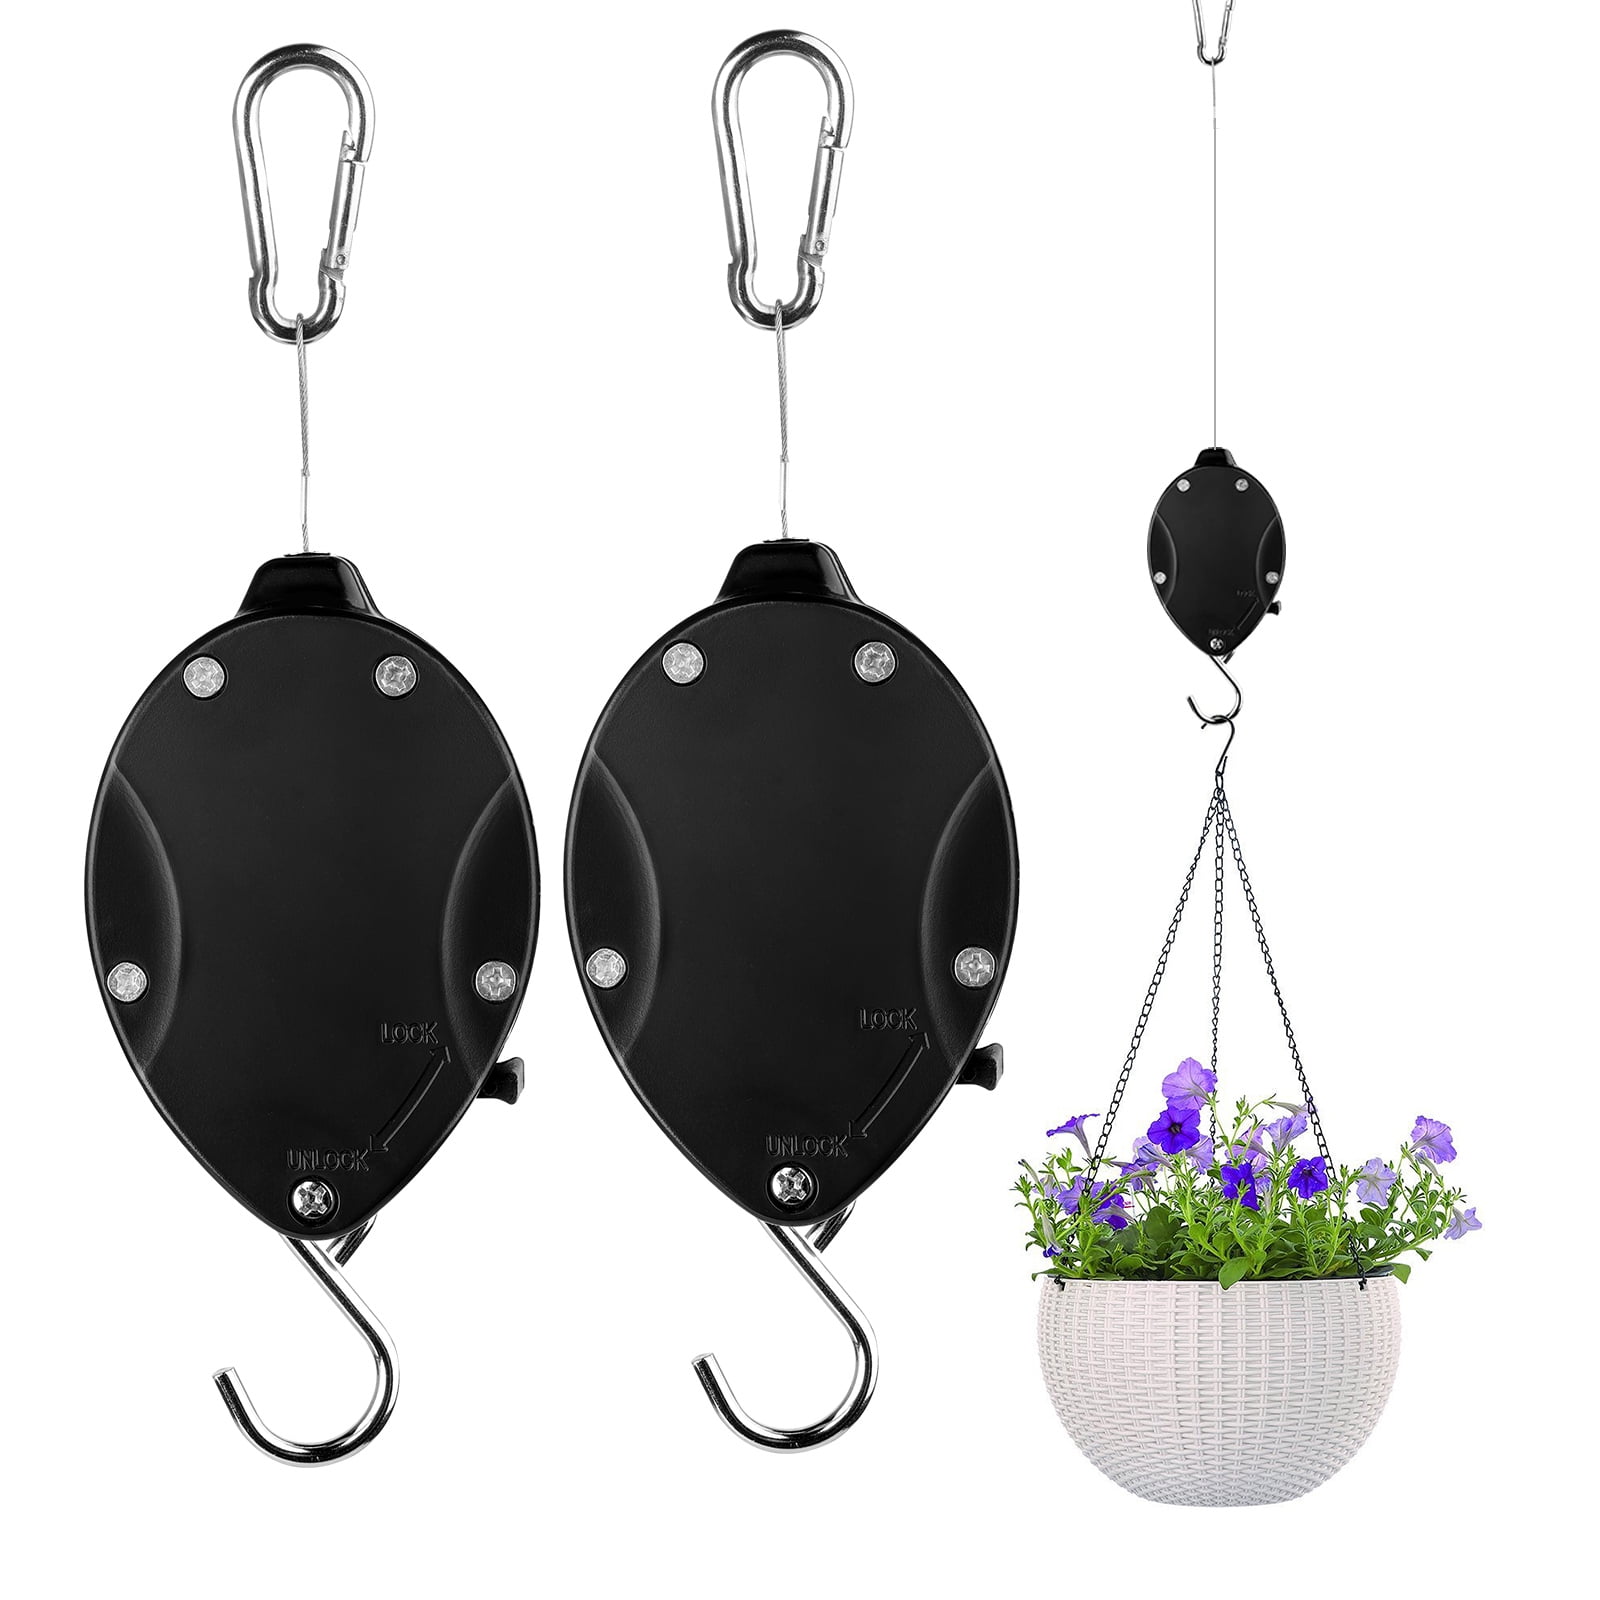 2Pack Jsanh Plant Pulley Retractable Pulley Plant Hanger Adjustable Plant Hangers with 2 Pack Ceiling Hooks for Garden Baskets Pots and Birds Feeder in Different Height Lower and Raise